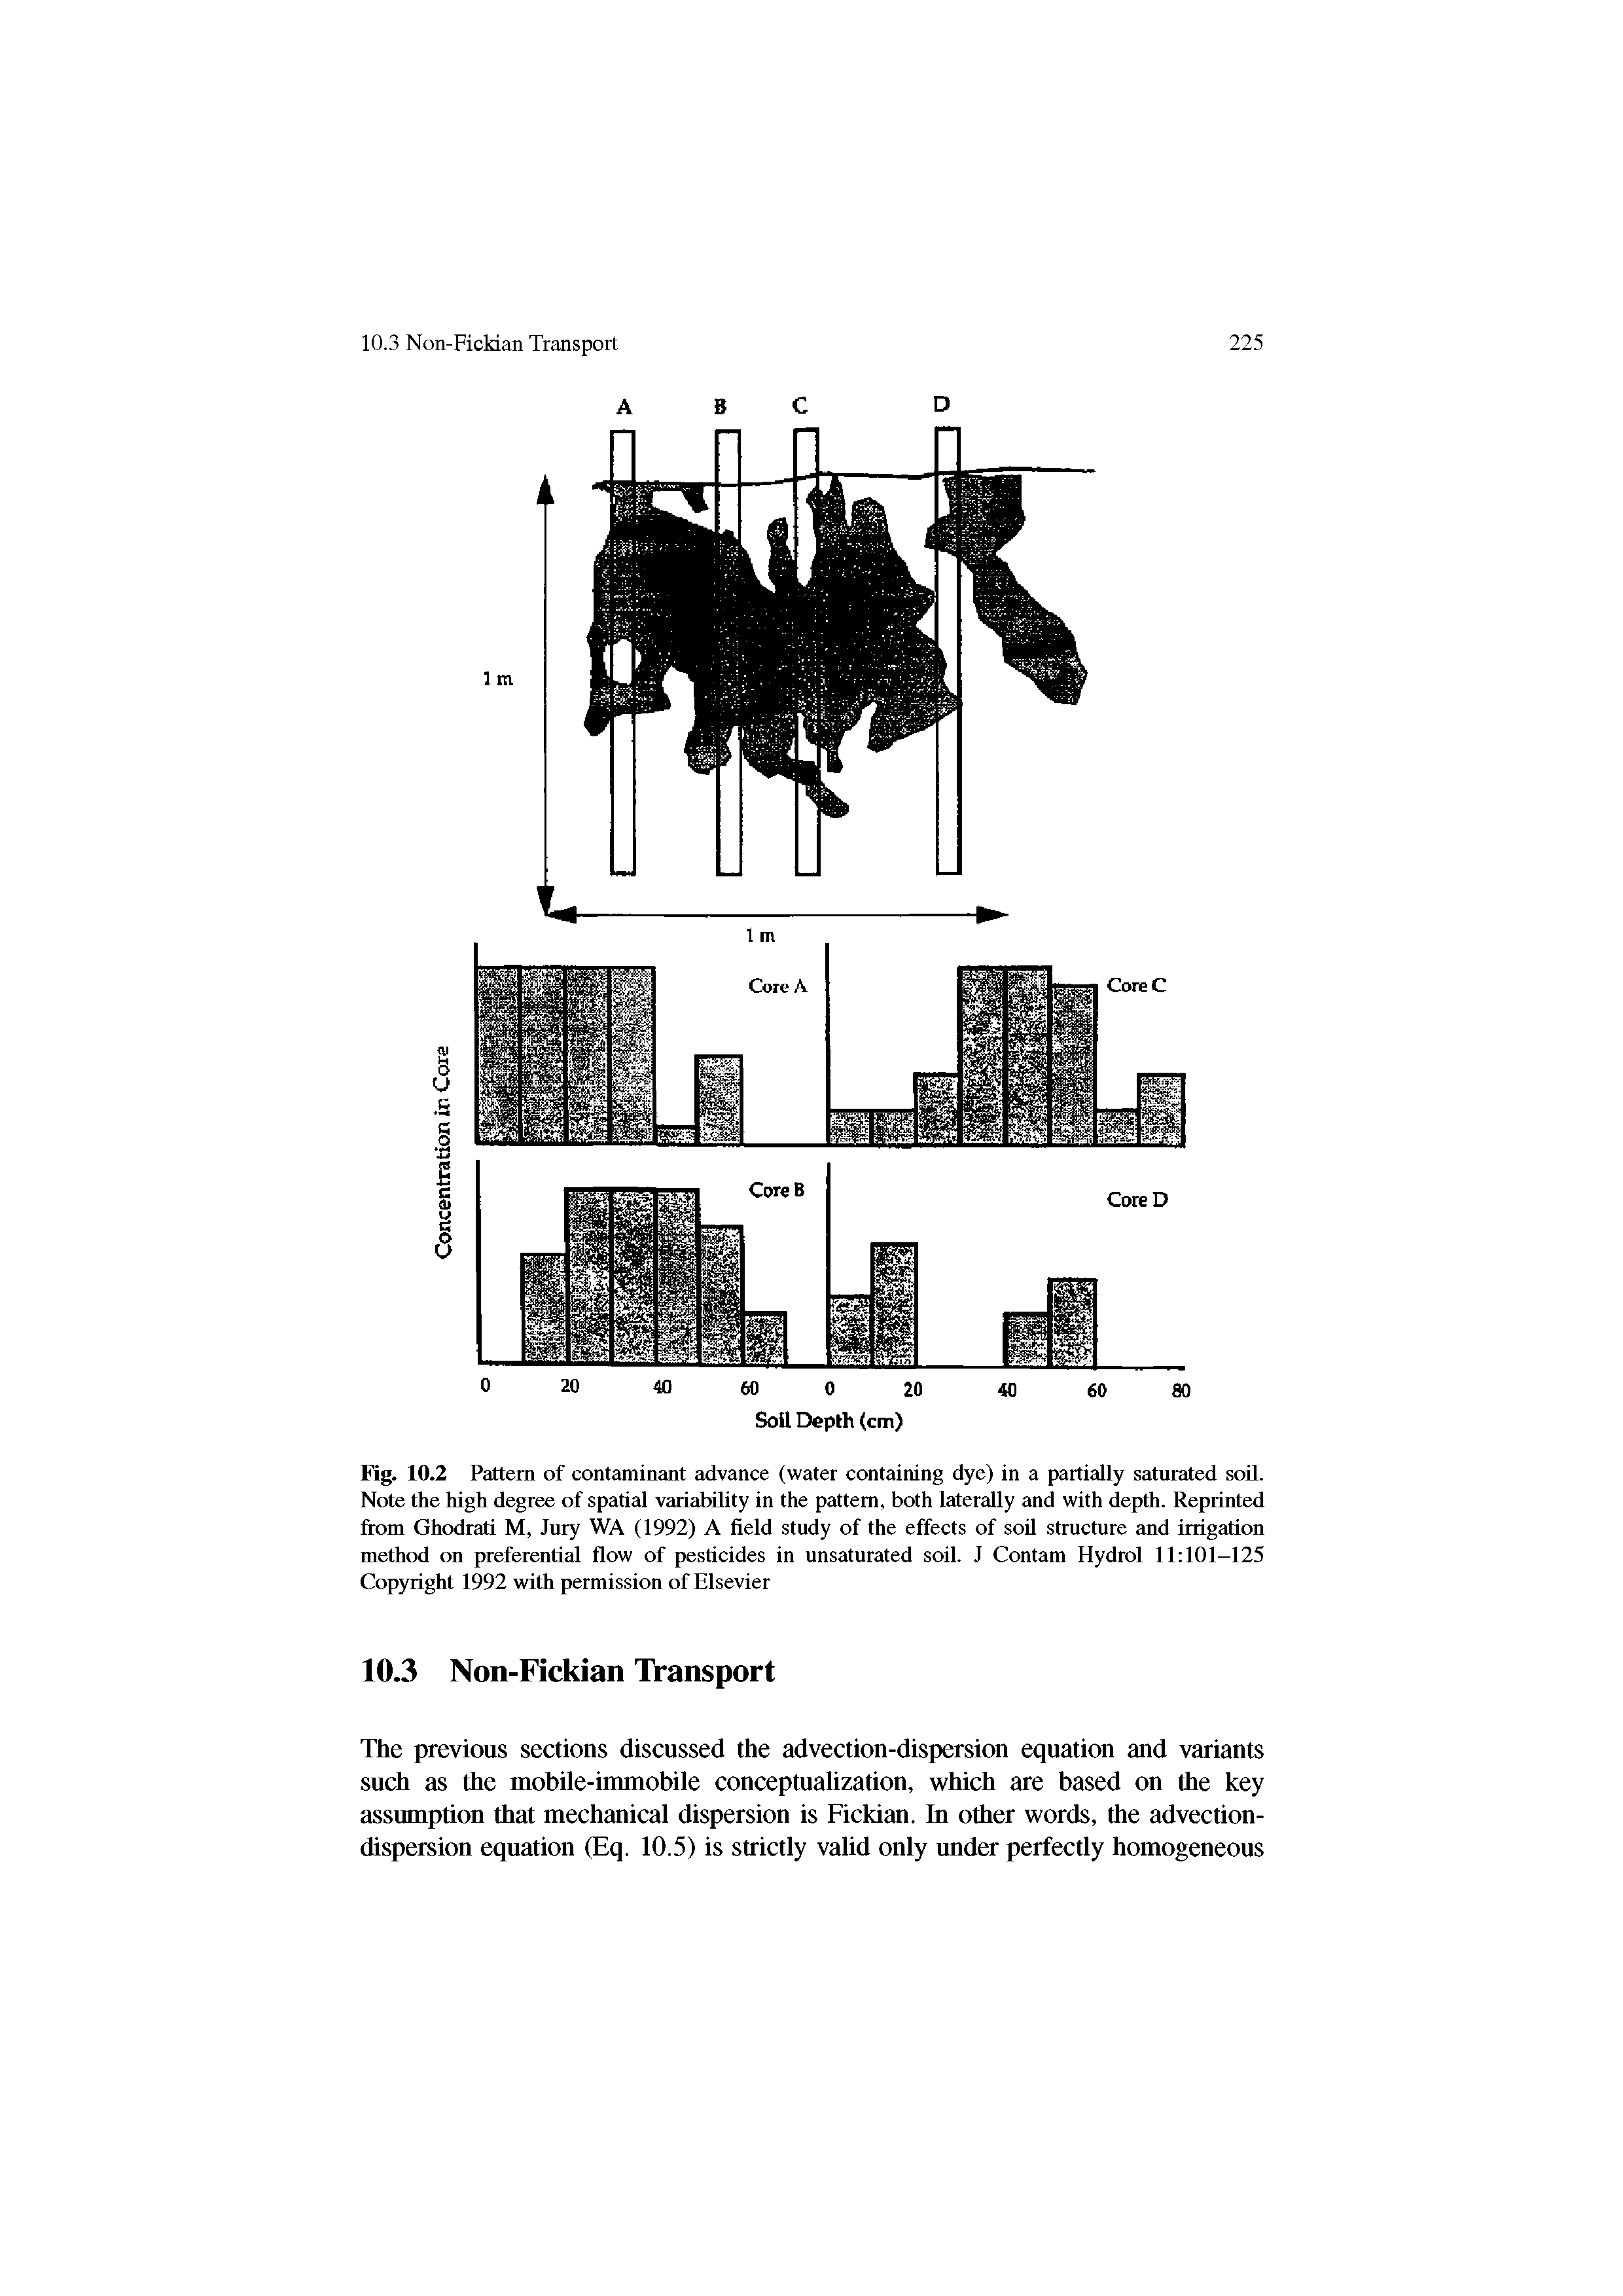 Fig. 10.2 Pattern of contaminant advance (water containing dye) in a partially saturated soil. Note the high degree of spatial variability in the pattern, both laterally and with depth. Reprinted from Ghodrati M, Jury WA (1992) A field study of the effects of soil structure and irrigation method on preferential flow of pesticides in unsaturated soil. J Contam Hydrol 11 101-125 Copyright 1992 with permission of Elsevier...